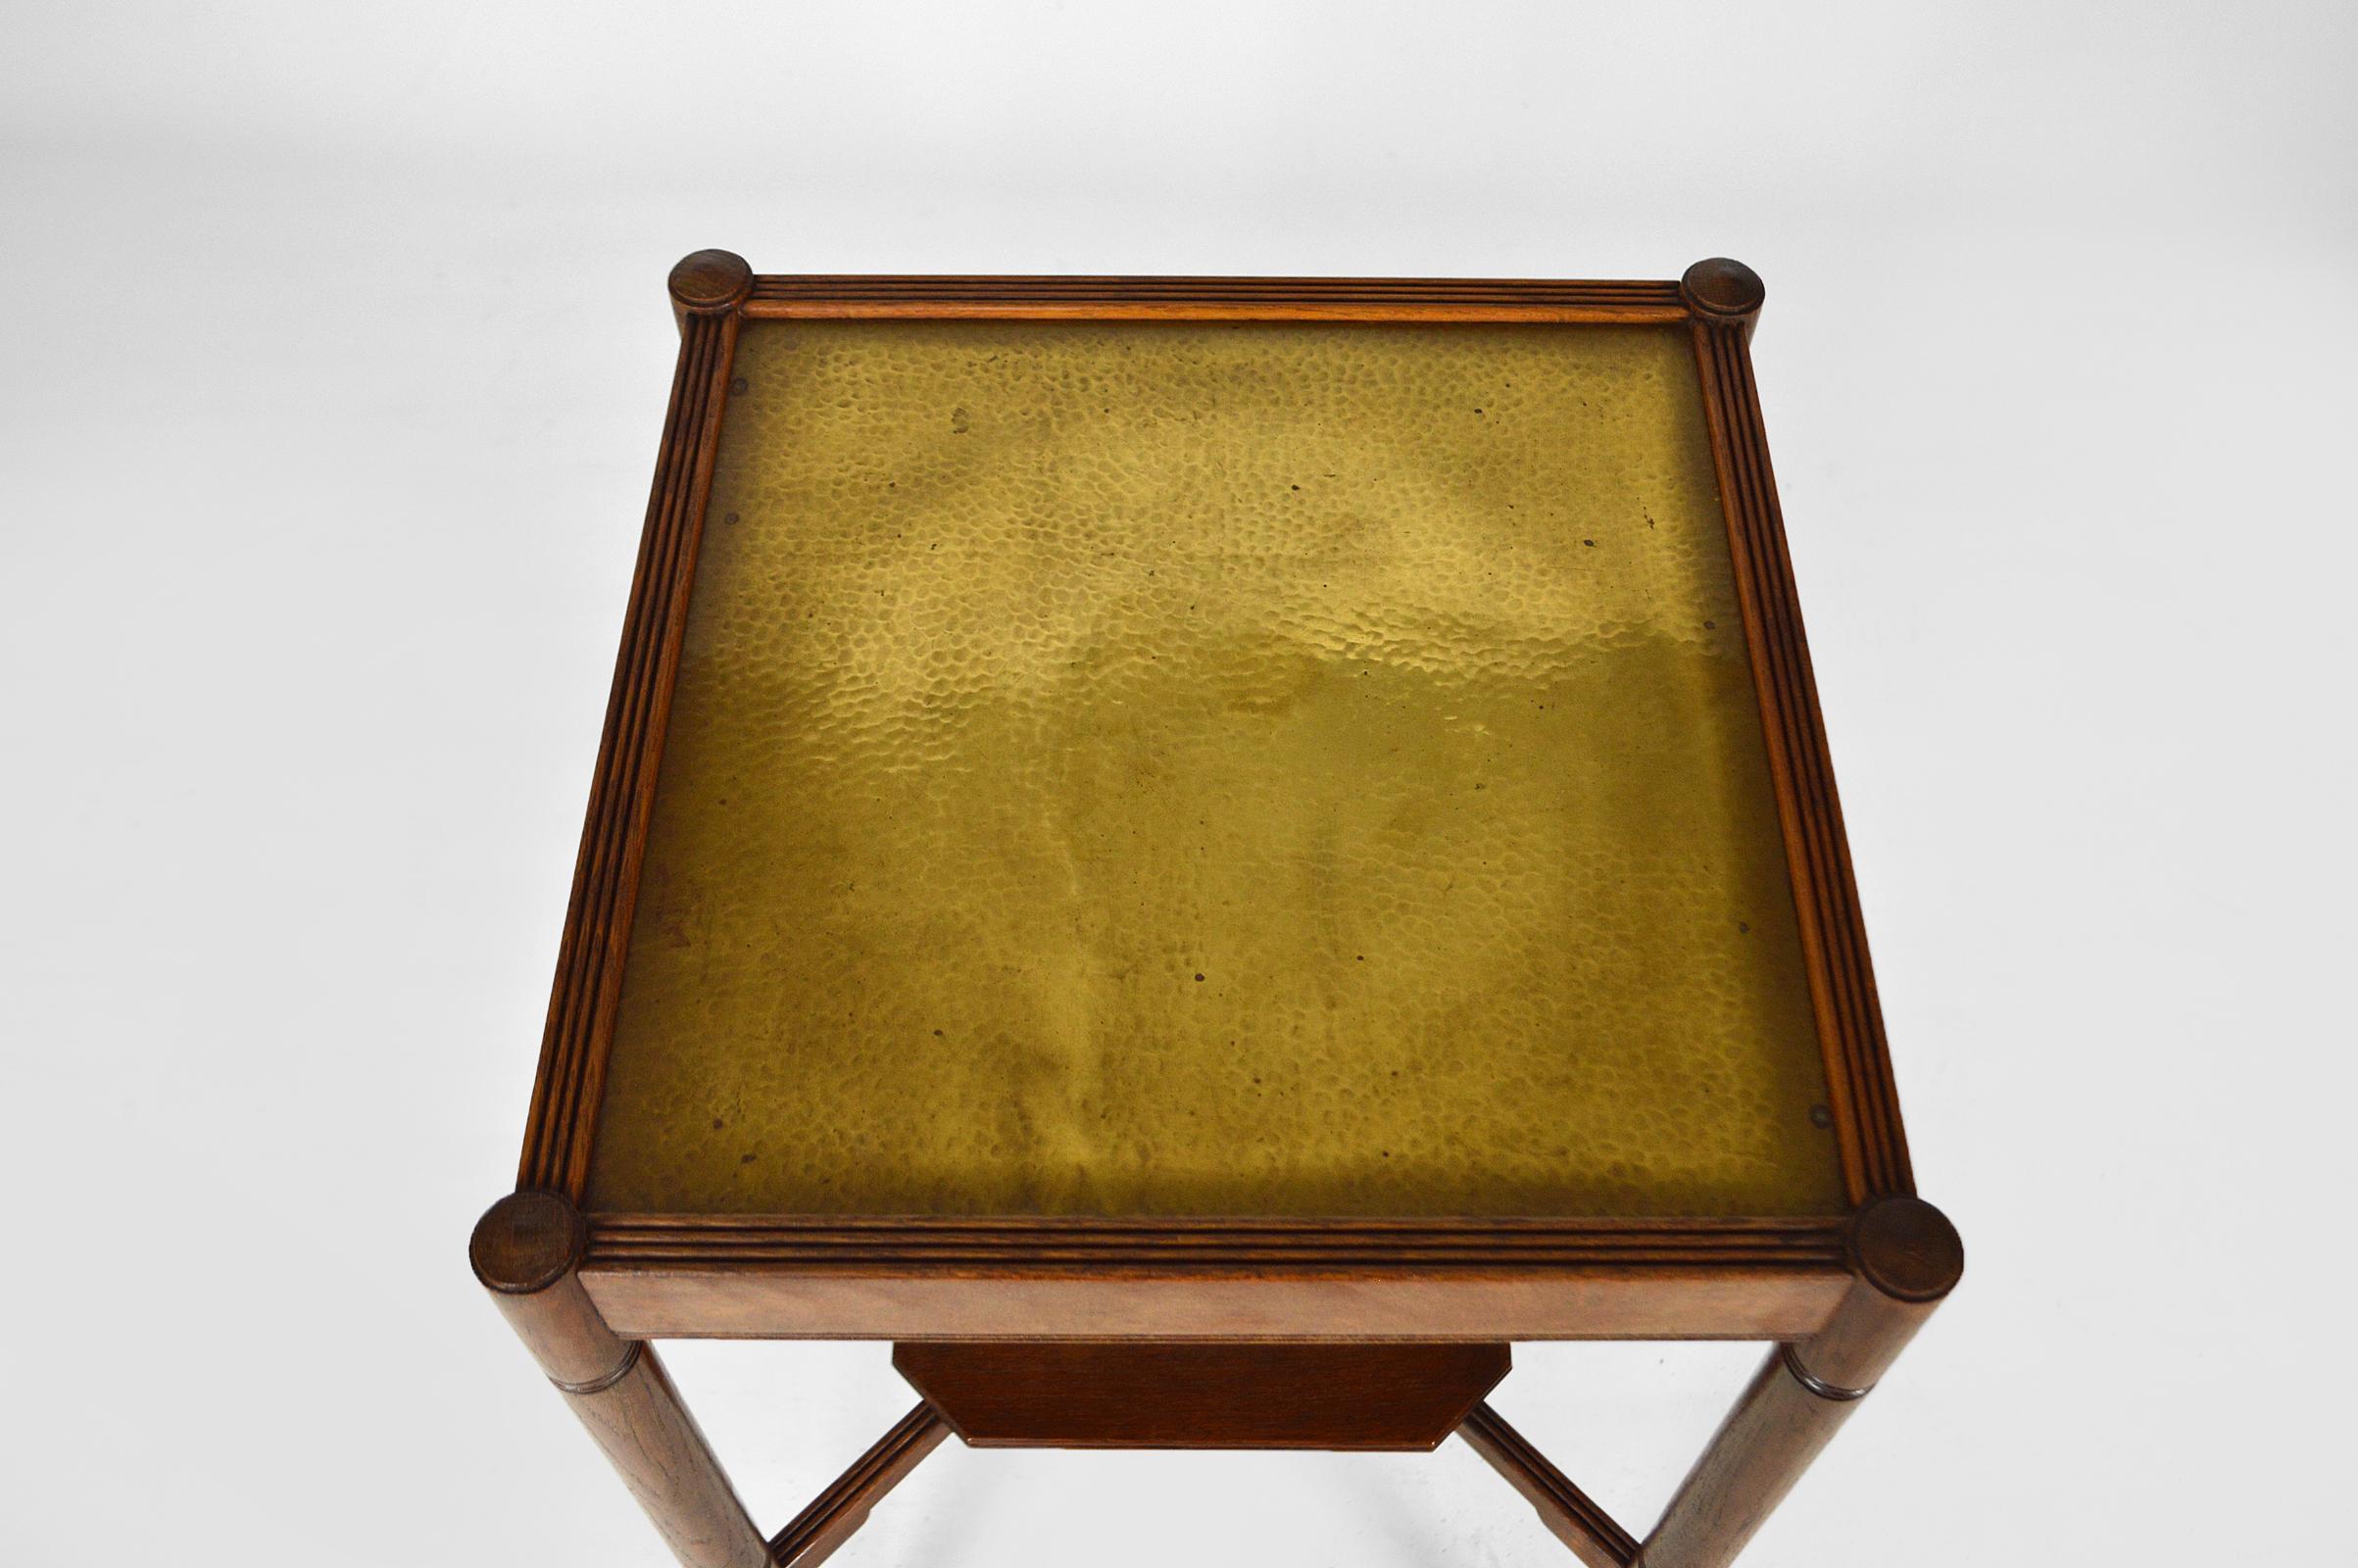 Arts & Crafts Square Pedestal Table in Oak and Brass, 19th Century For Sale 1